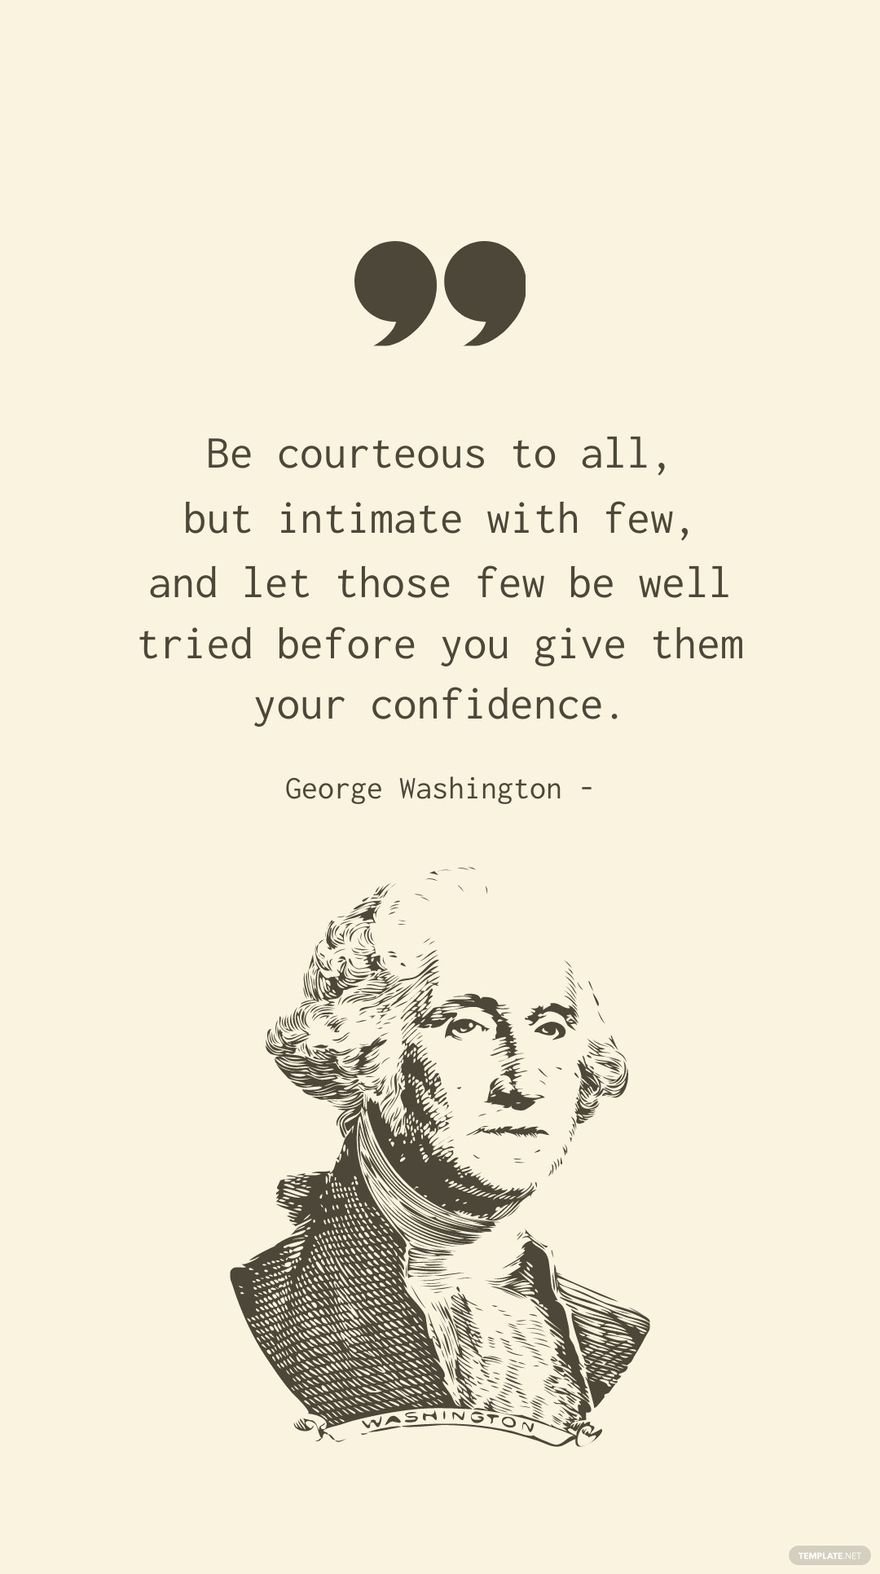 George Washington - Be courteous to all, but intimate with few, and let those few be well tried before you give them your confidence.